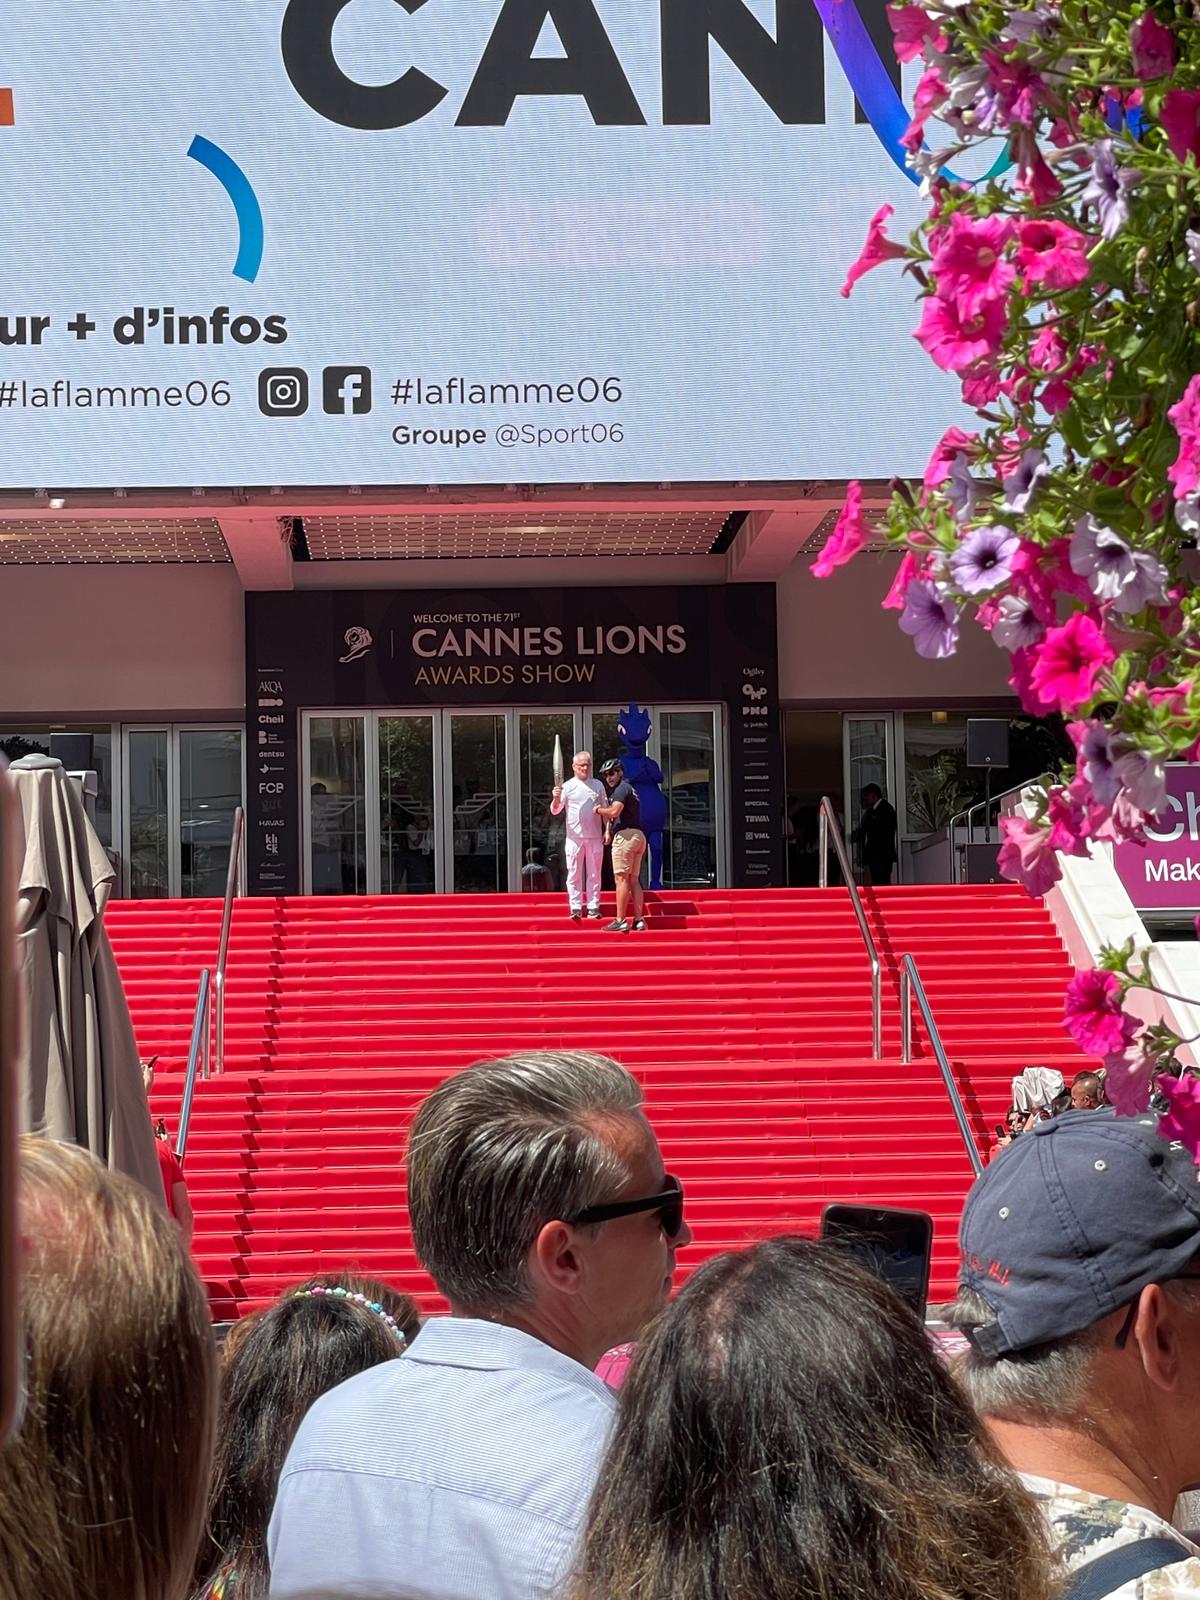 Olympic Torch at the Palais in Cannes. Credit Jack Benjamin